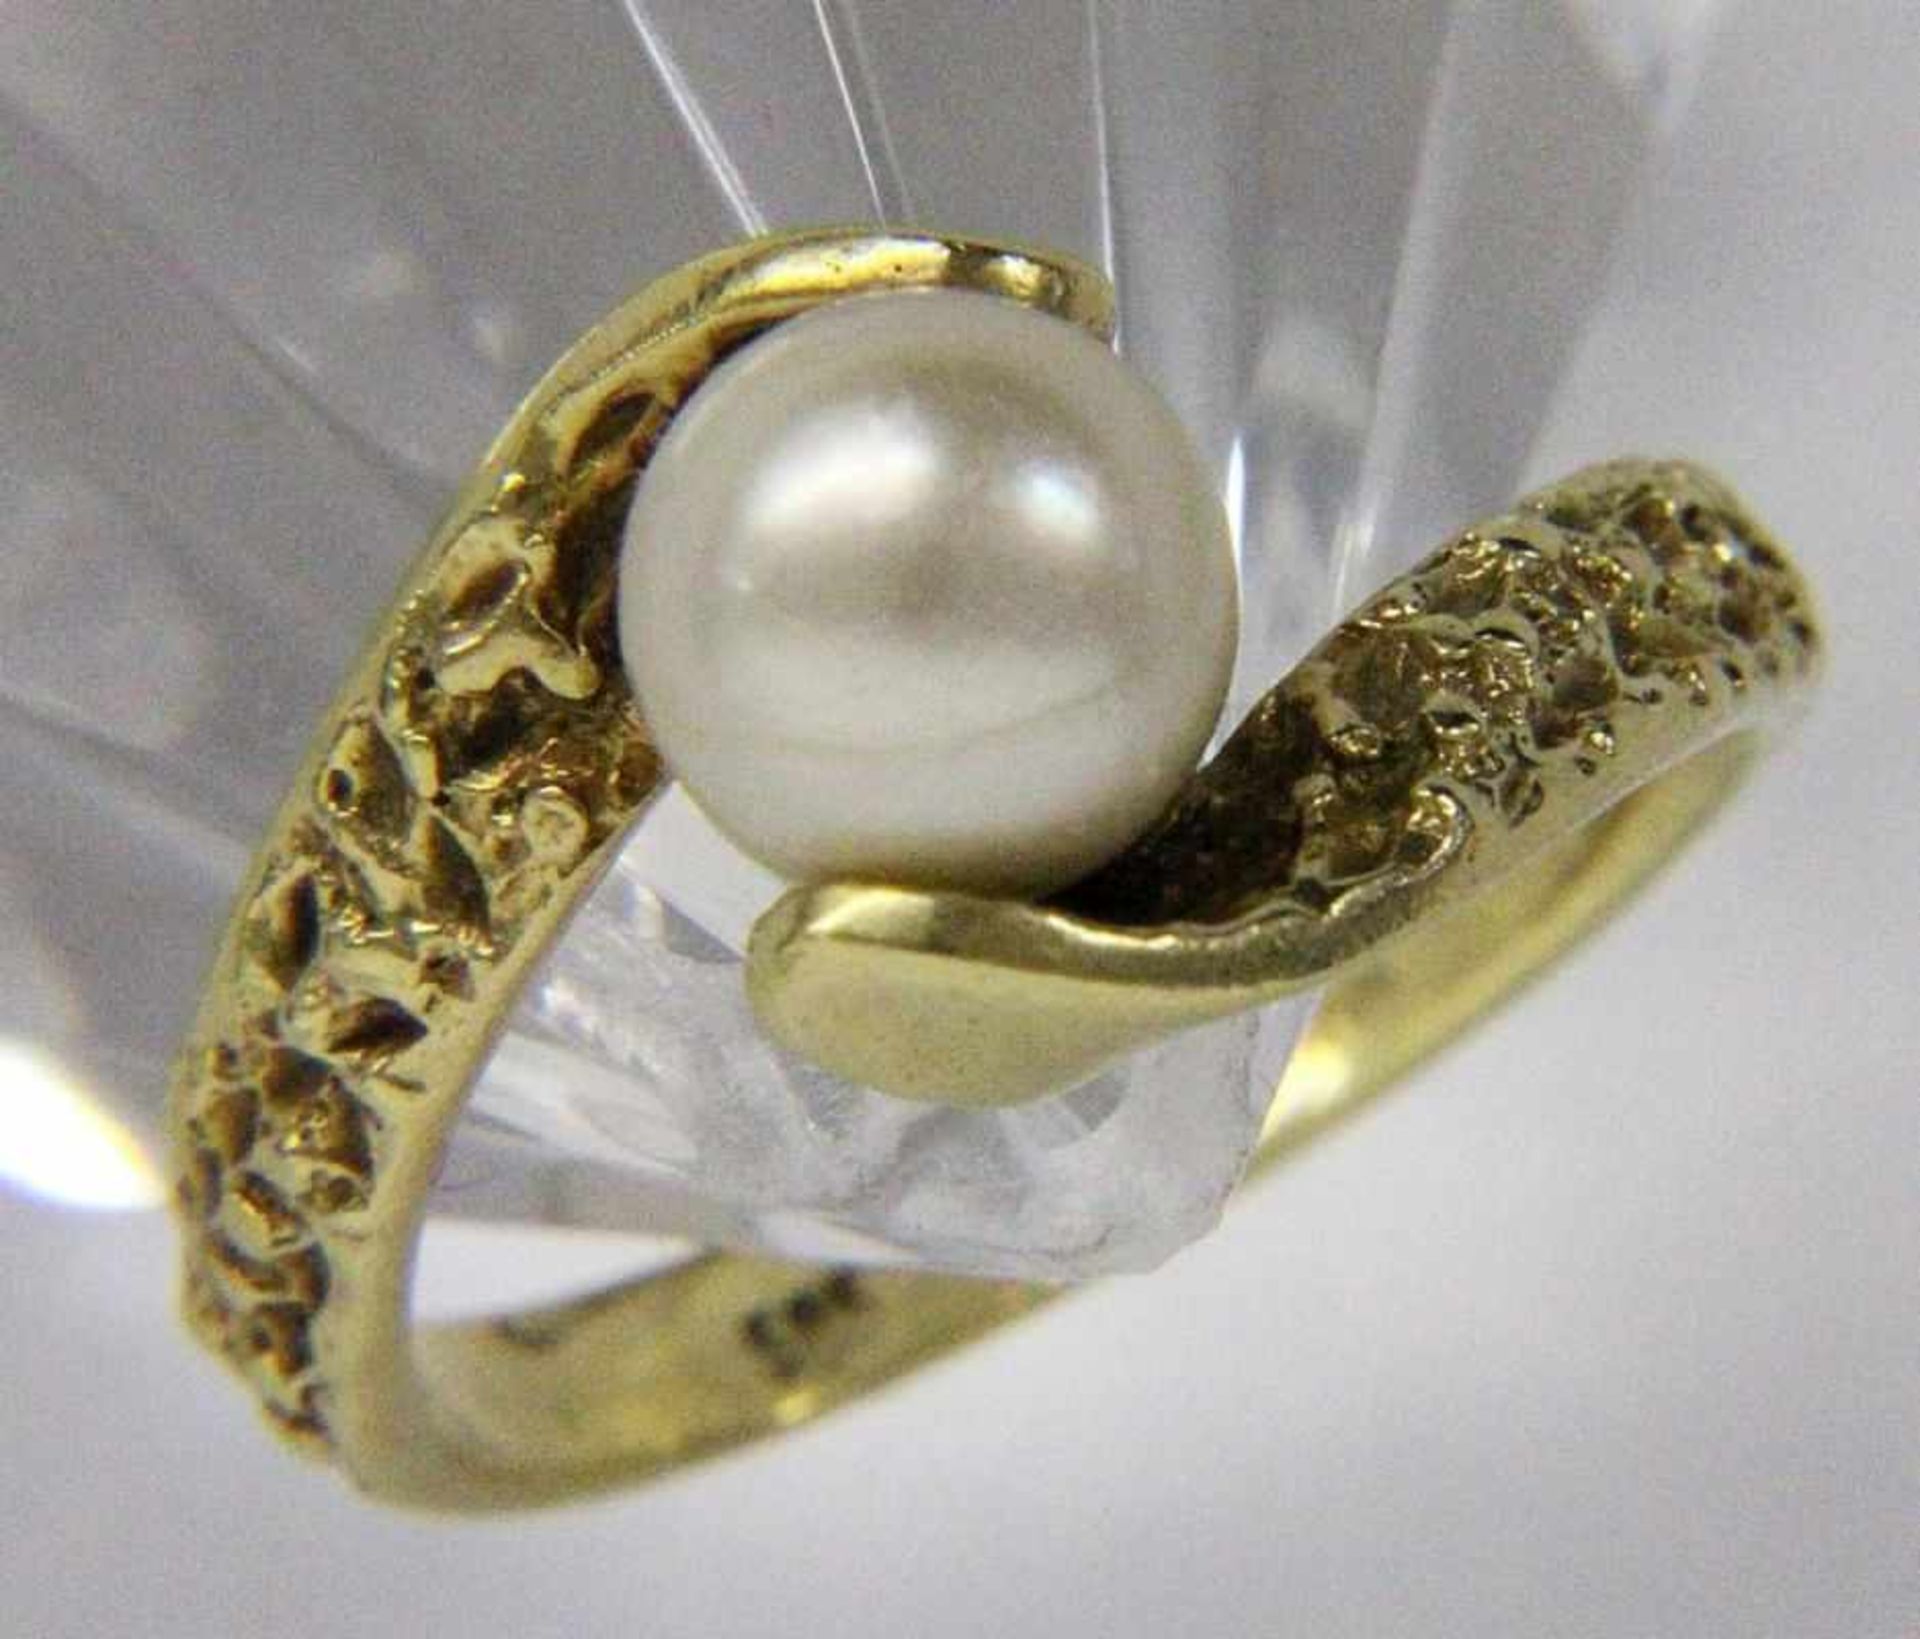 A PEARL RING 585/000 yellow gold with cultured pearl measuring approximately 7 mm. Ringsize 55,